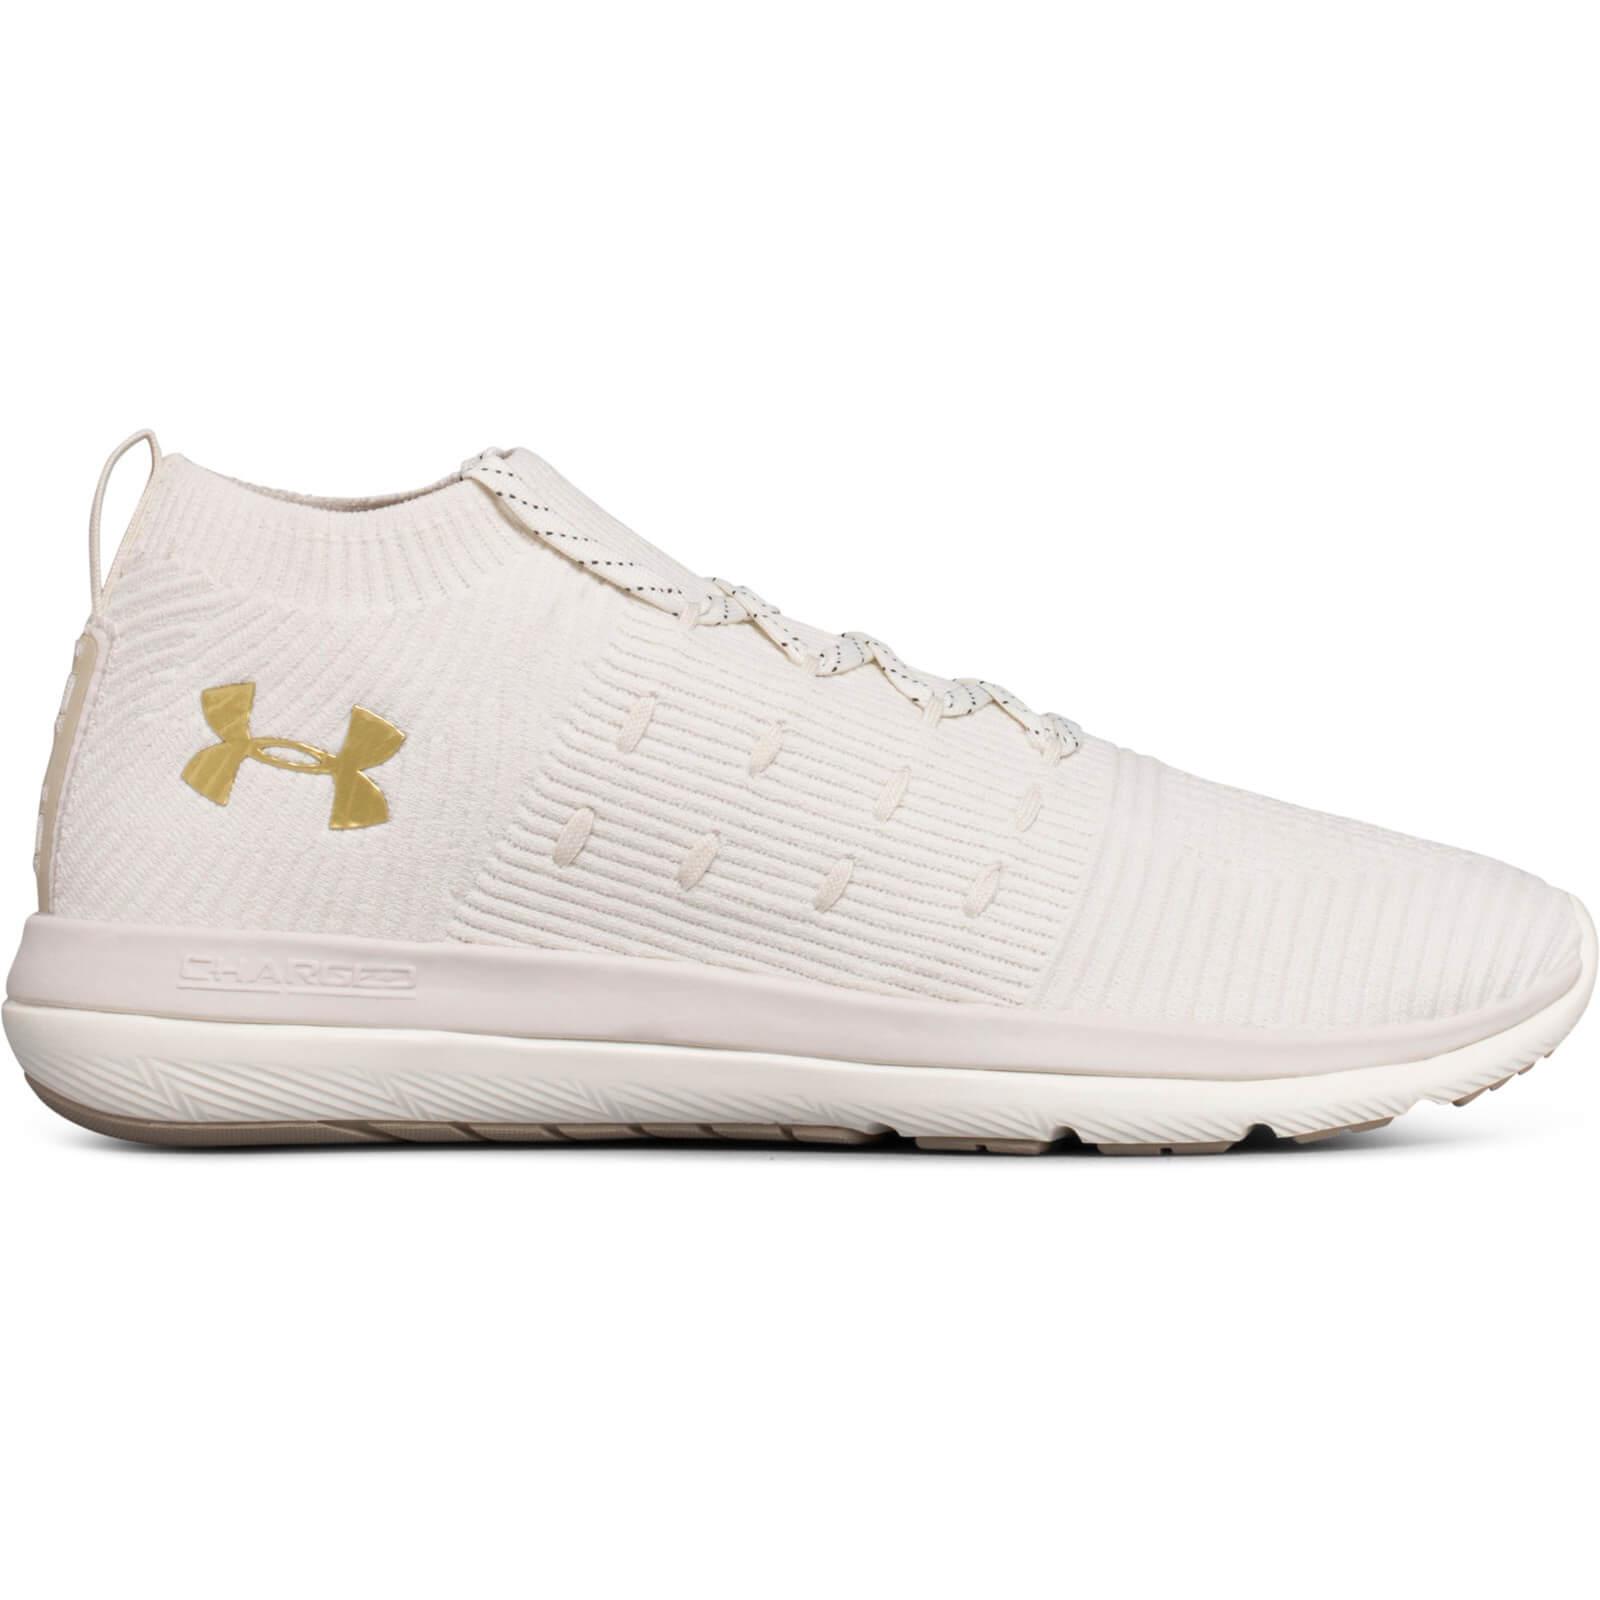 Under Armour Slingflex Rise in Ivory 